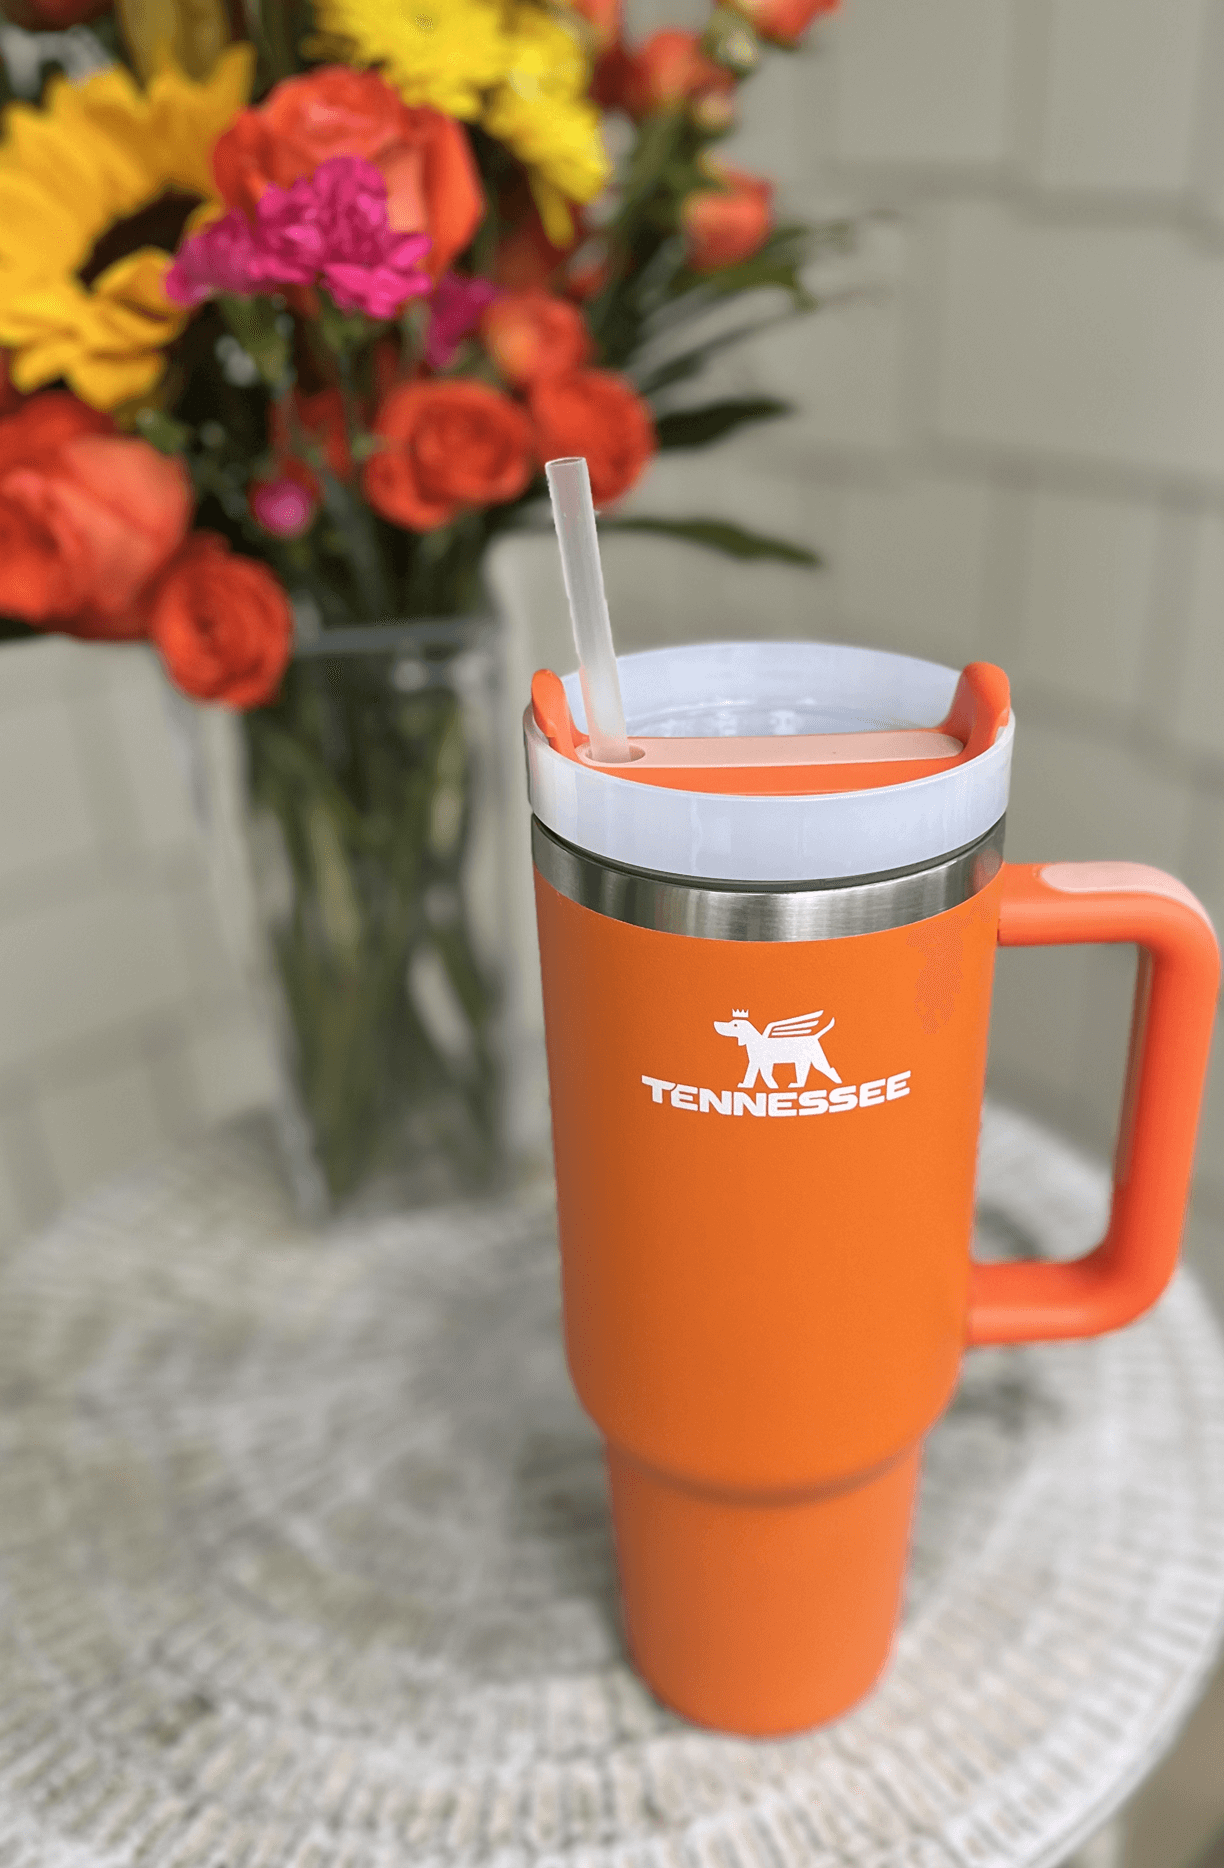 Shop gifts for college and high school graduates from Rally Stand! Spoil your Graduate with a reusable water tumbler they can carry from class to class. Gift it to a high school graduate in one of their new school's team and colors. Gift it to a College G